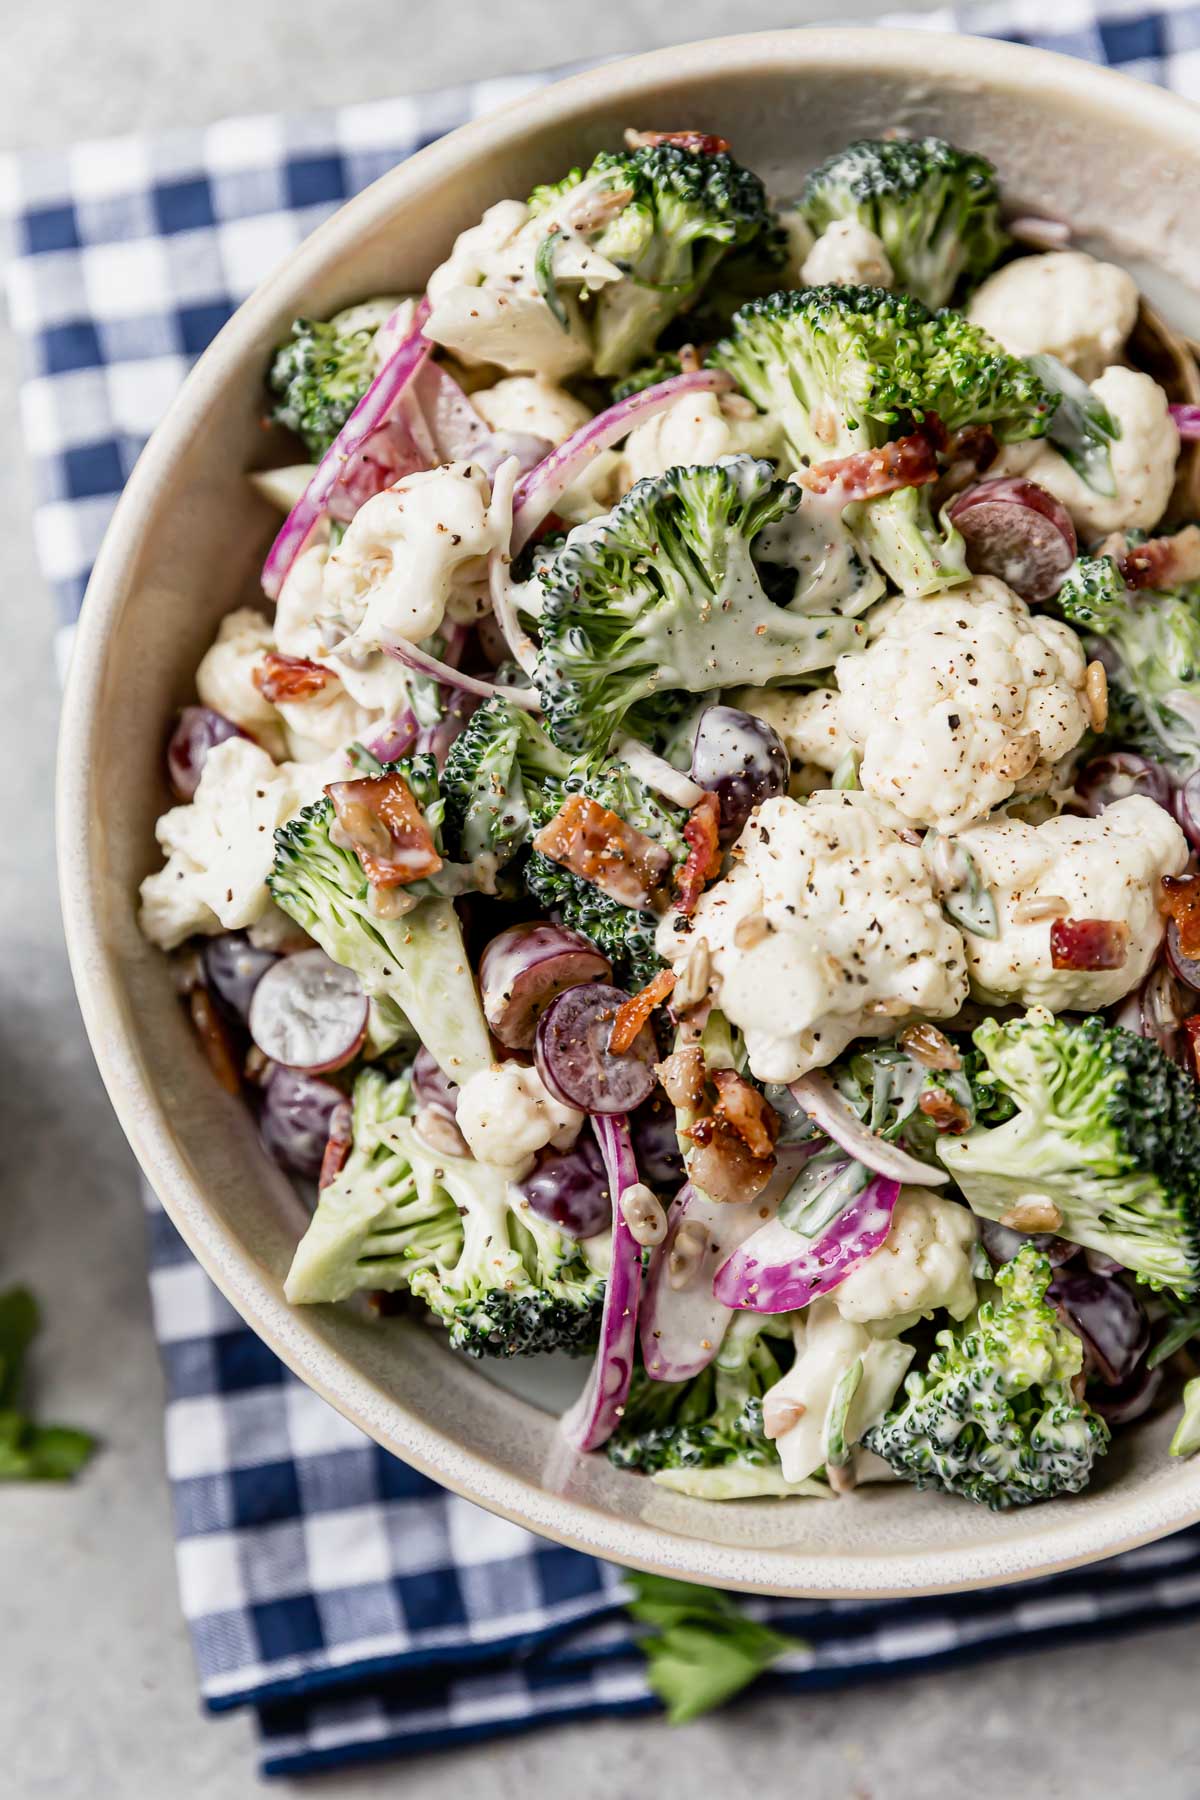 Broccoli Cauliflower Salad with Bacon (Whole30) - The Real Food Dietitians